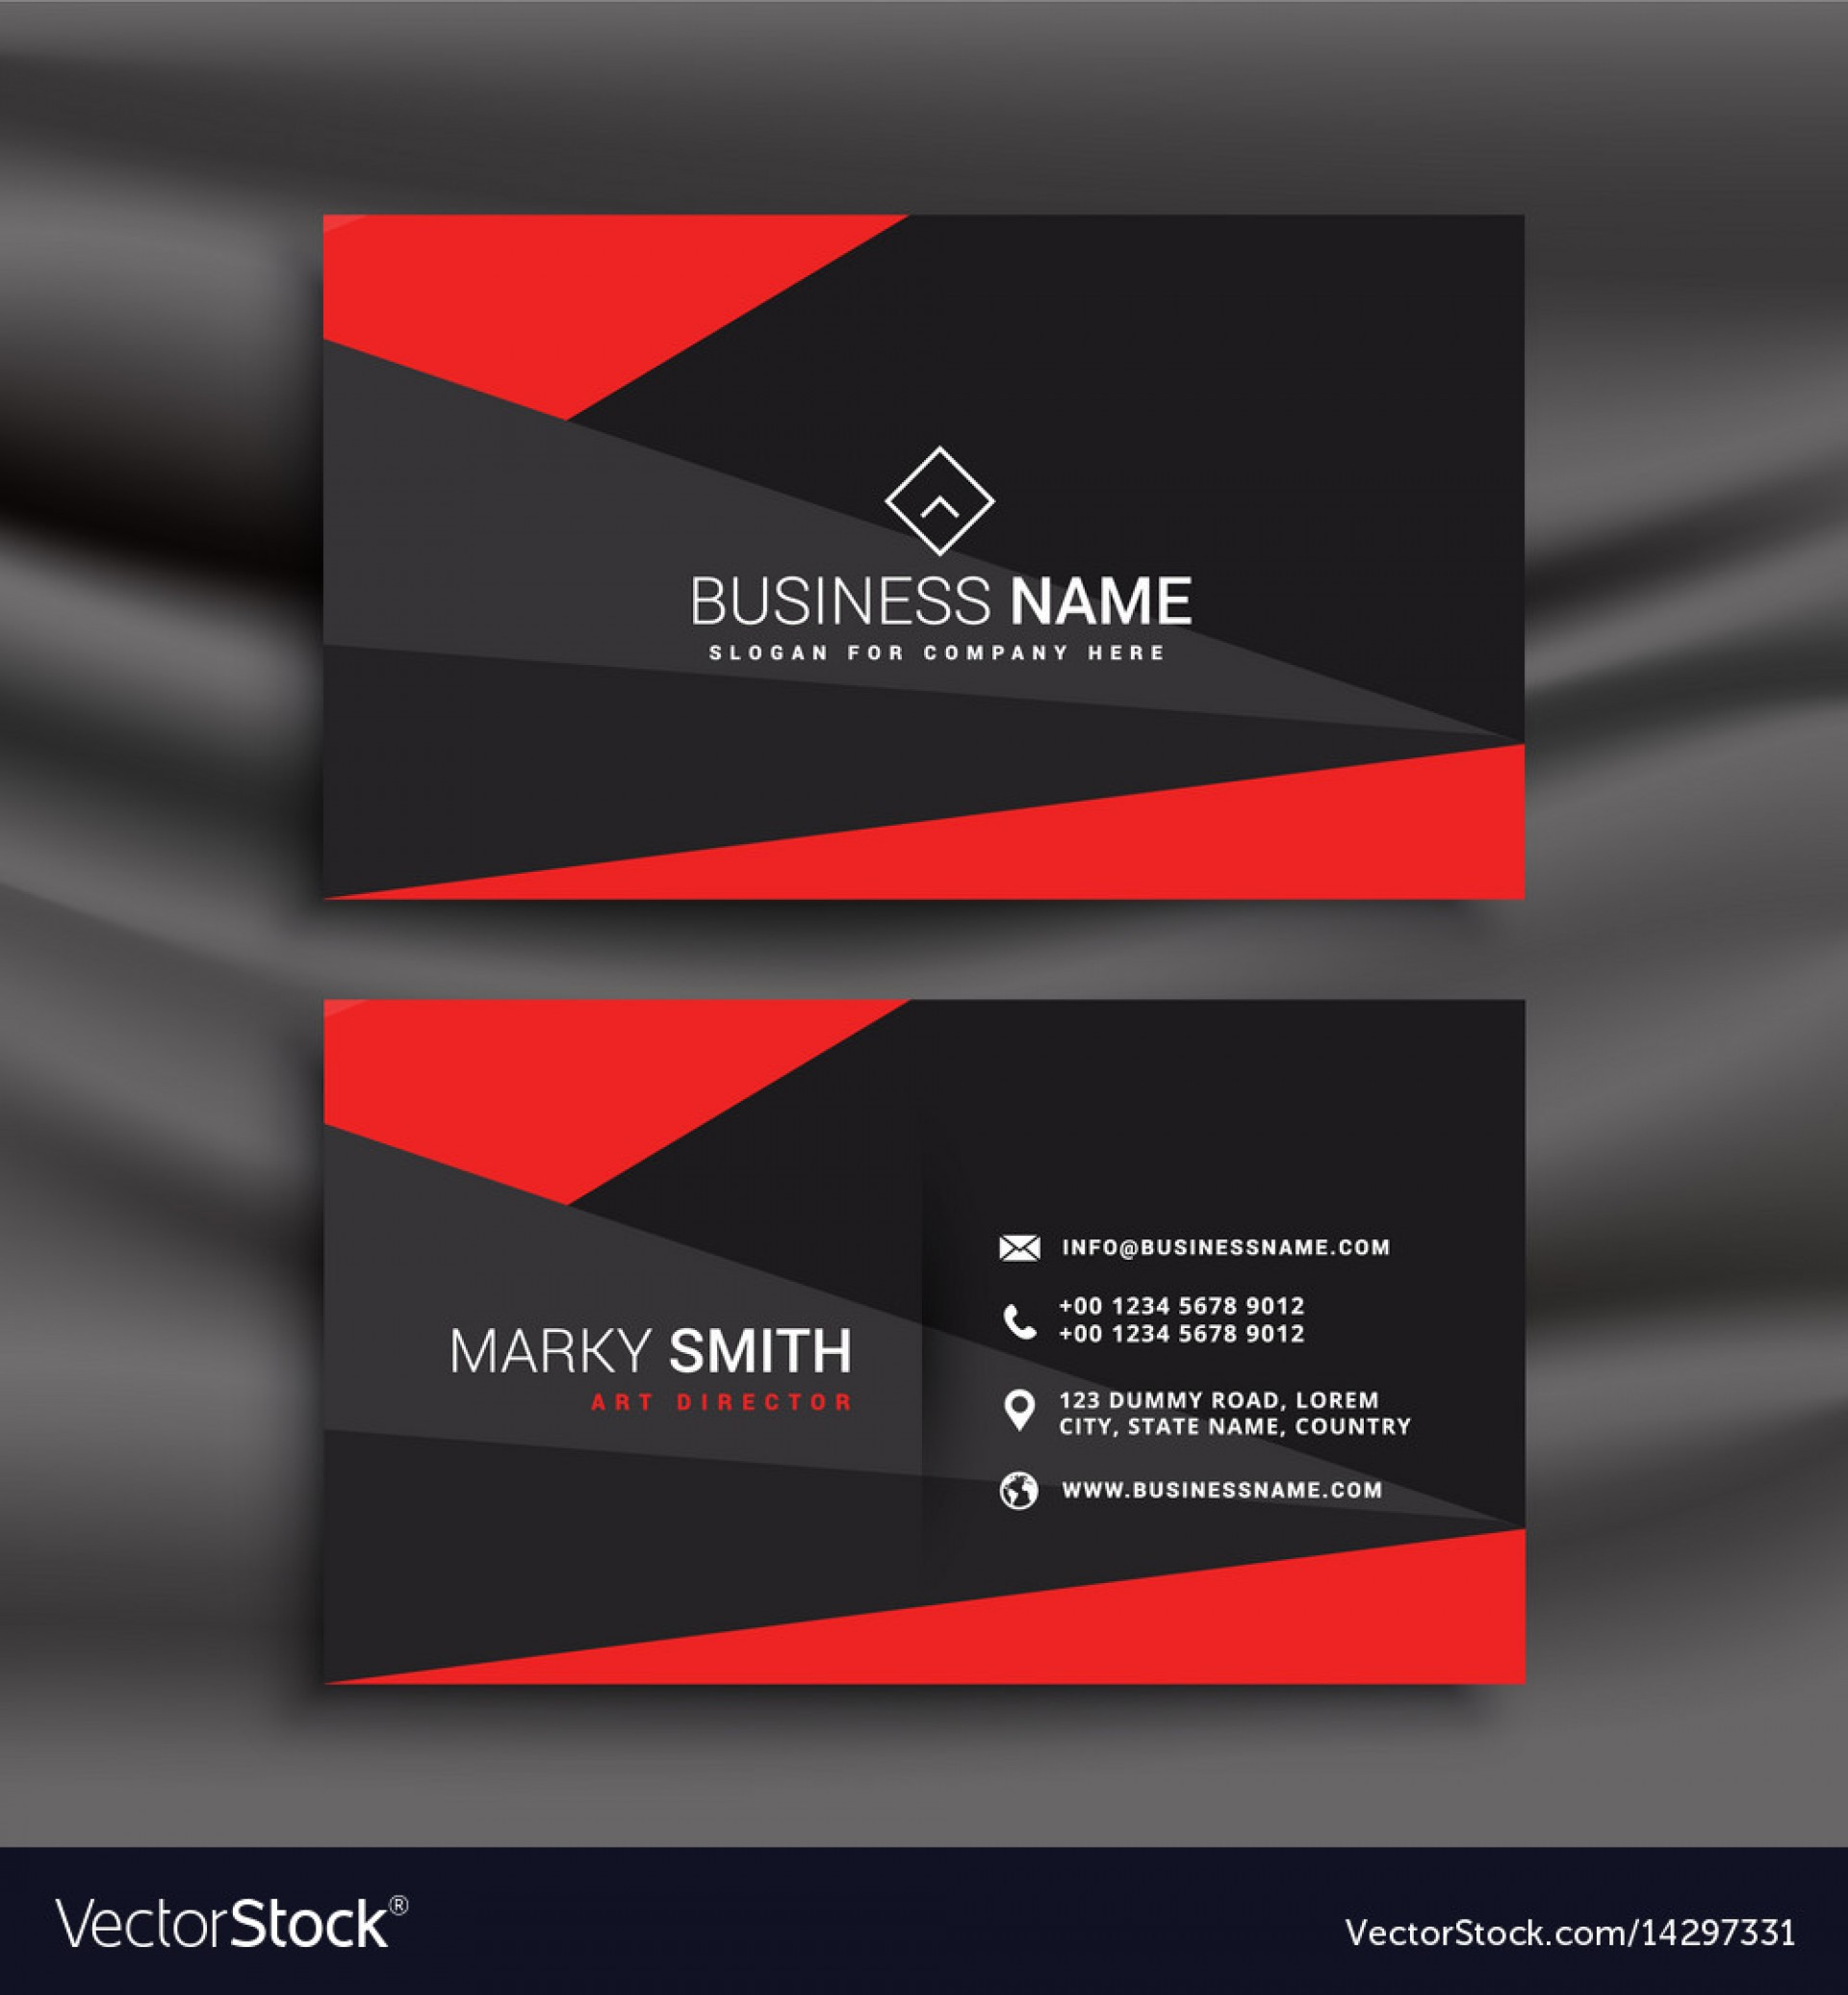 Beautiful Band Business Card Templates Free Of Business Card Template Avery 8371